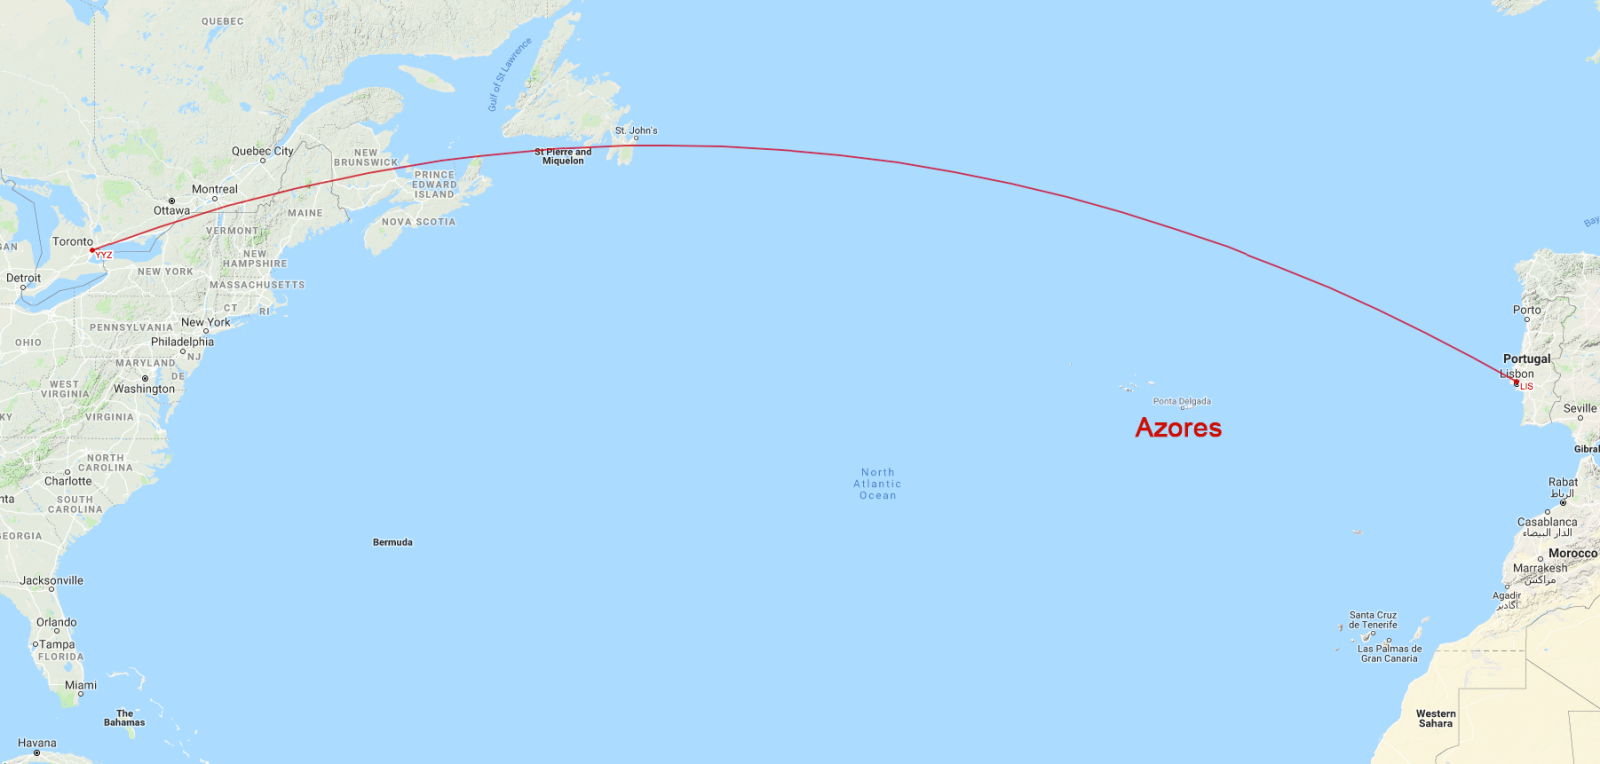 The planned route for Air Transat Flight 236 (Great Circle Mapper)